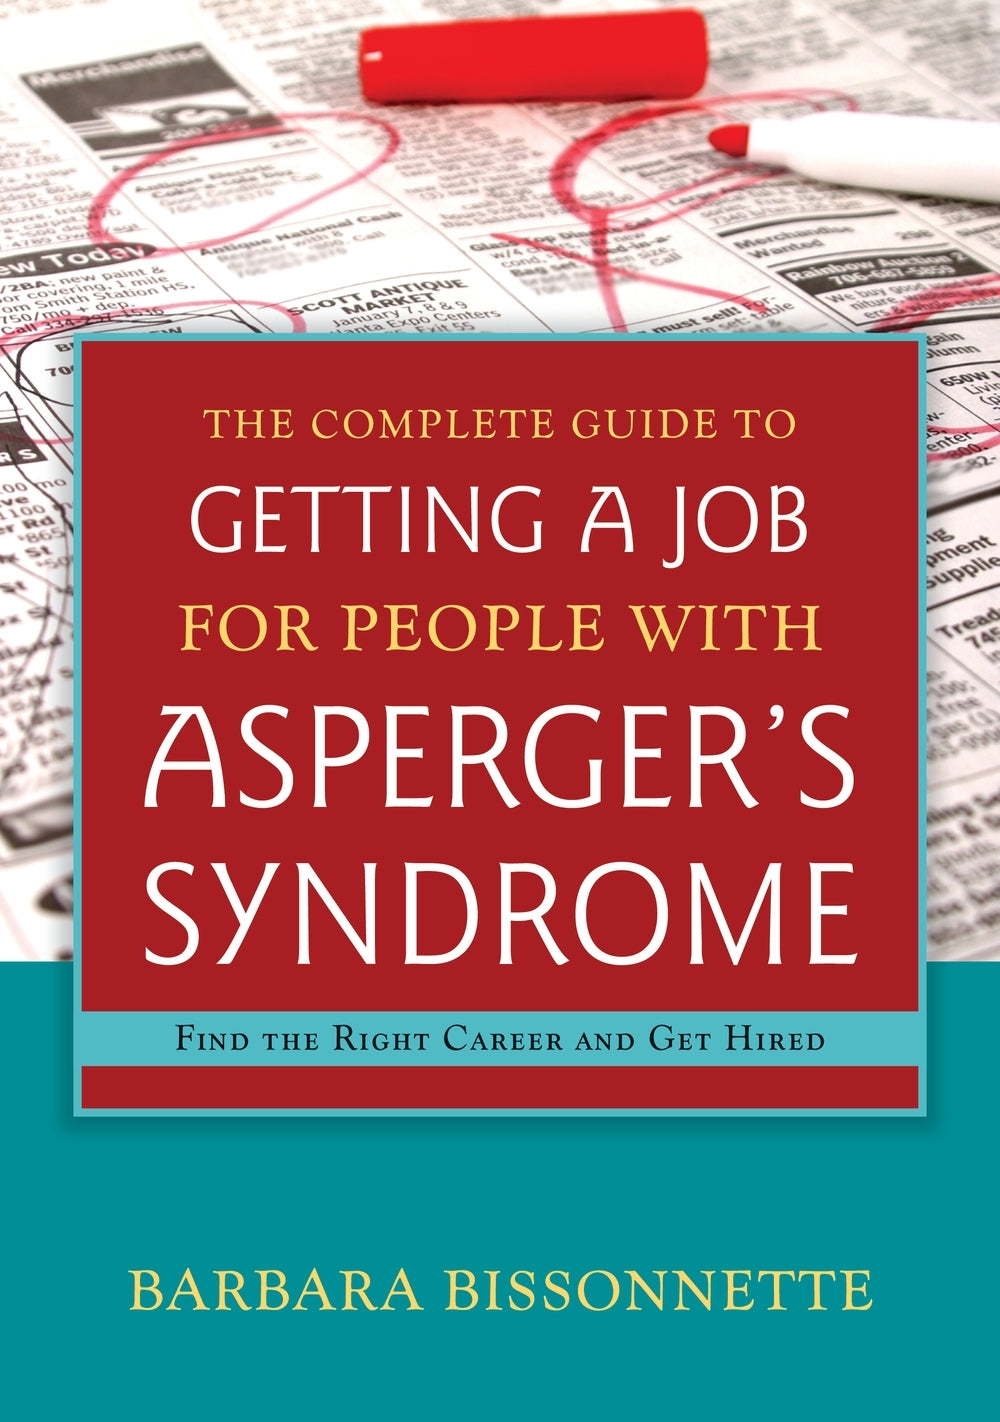 The Complete Guide to Getting a Job for People with Asperger's Syndrome by Barbara Bissonnette